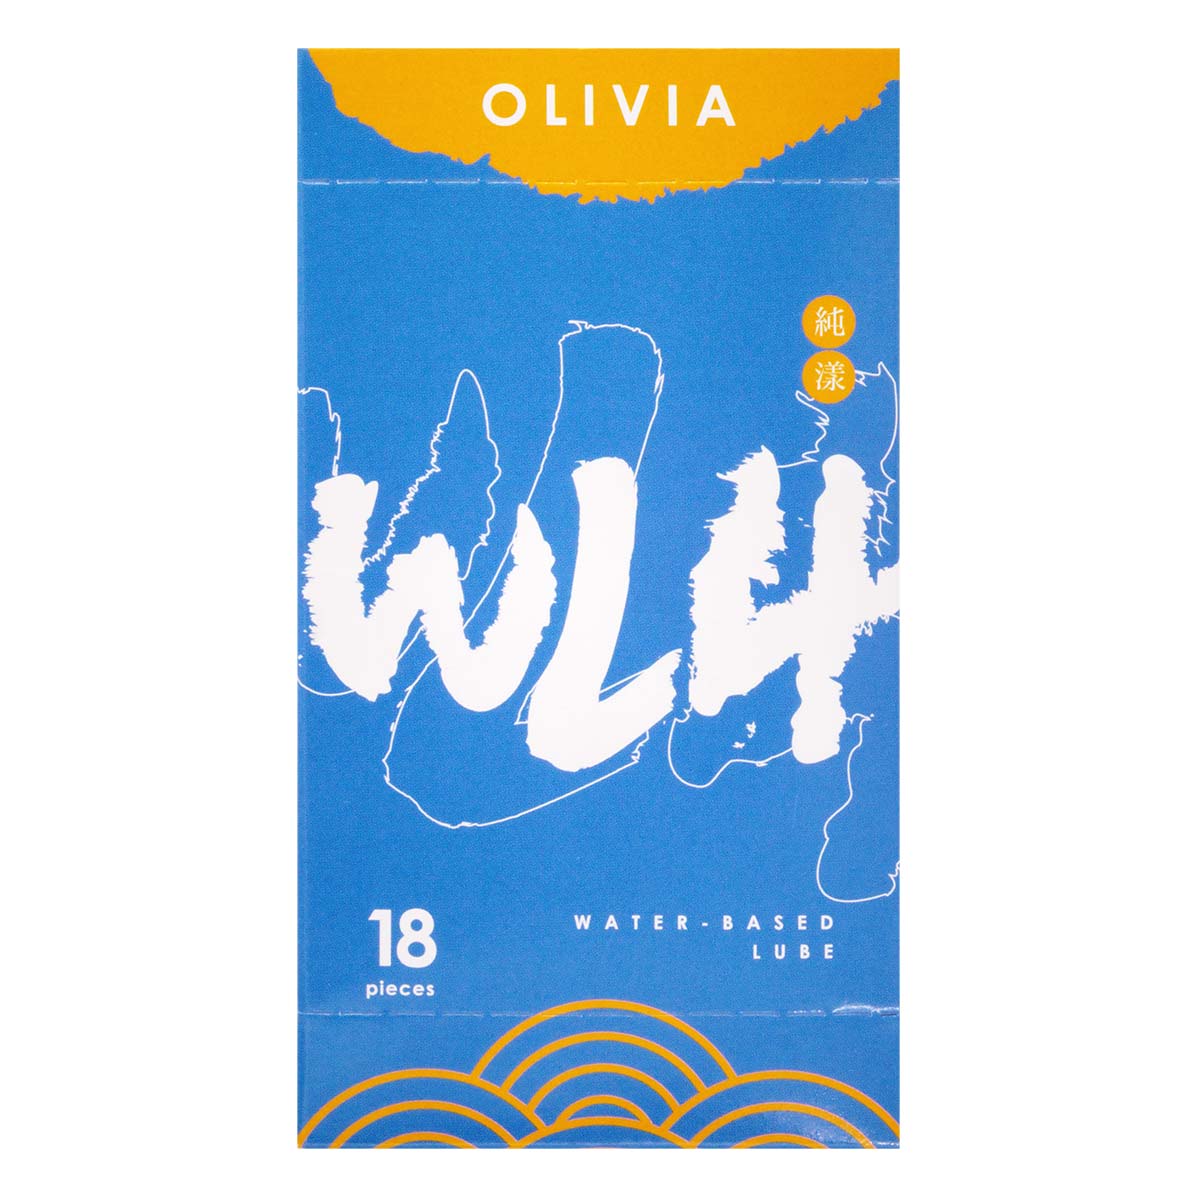 Olivia The East Pure 4g (sachet) 18 pieces Water-based Lubricant-p_2